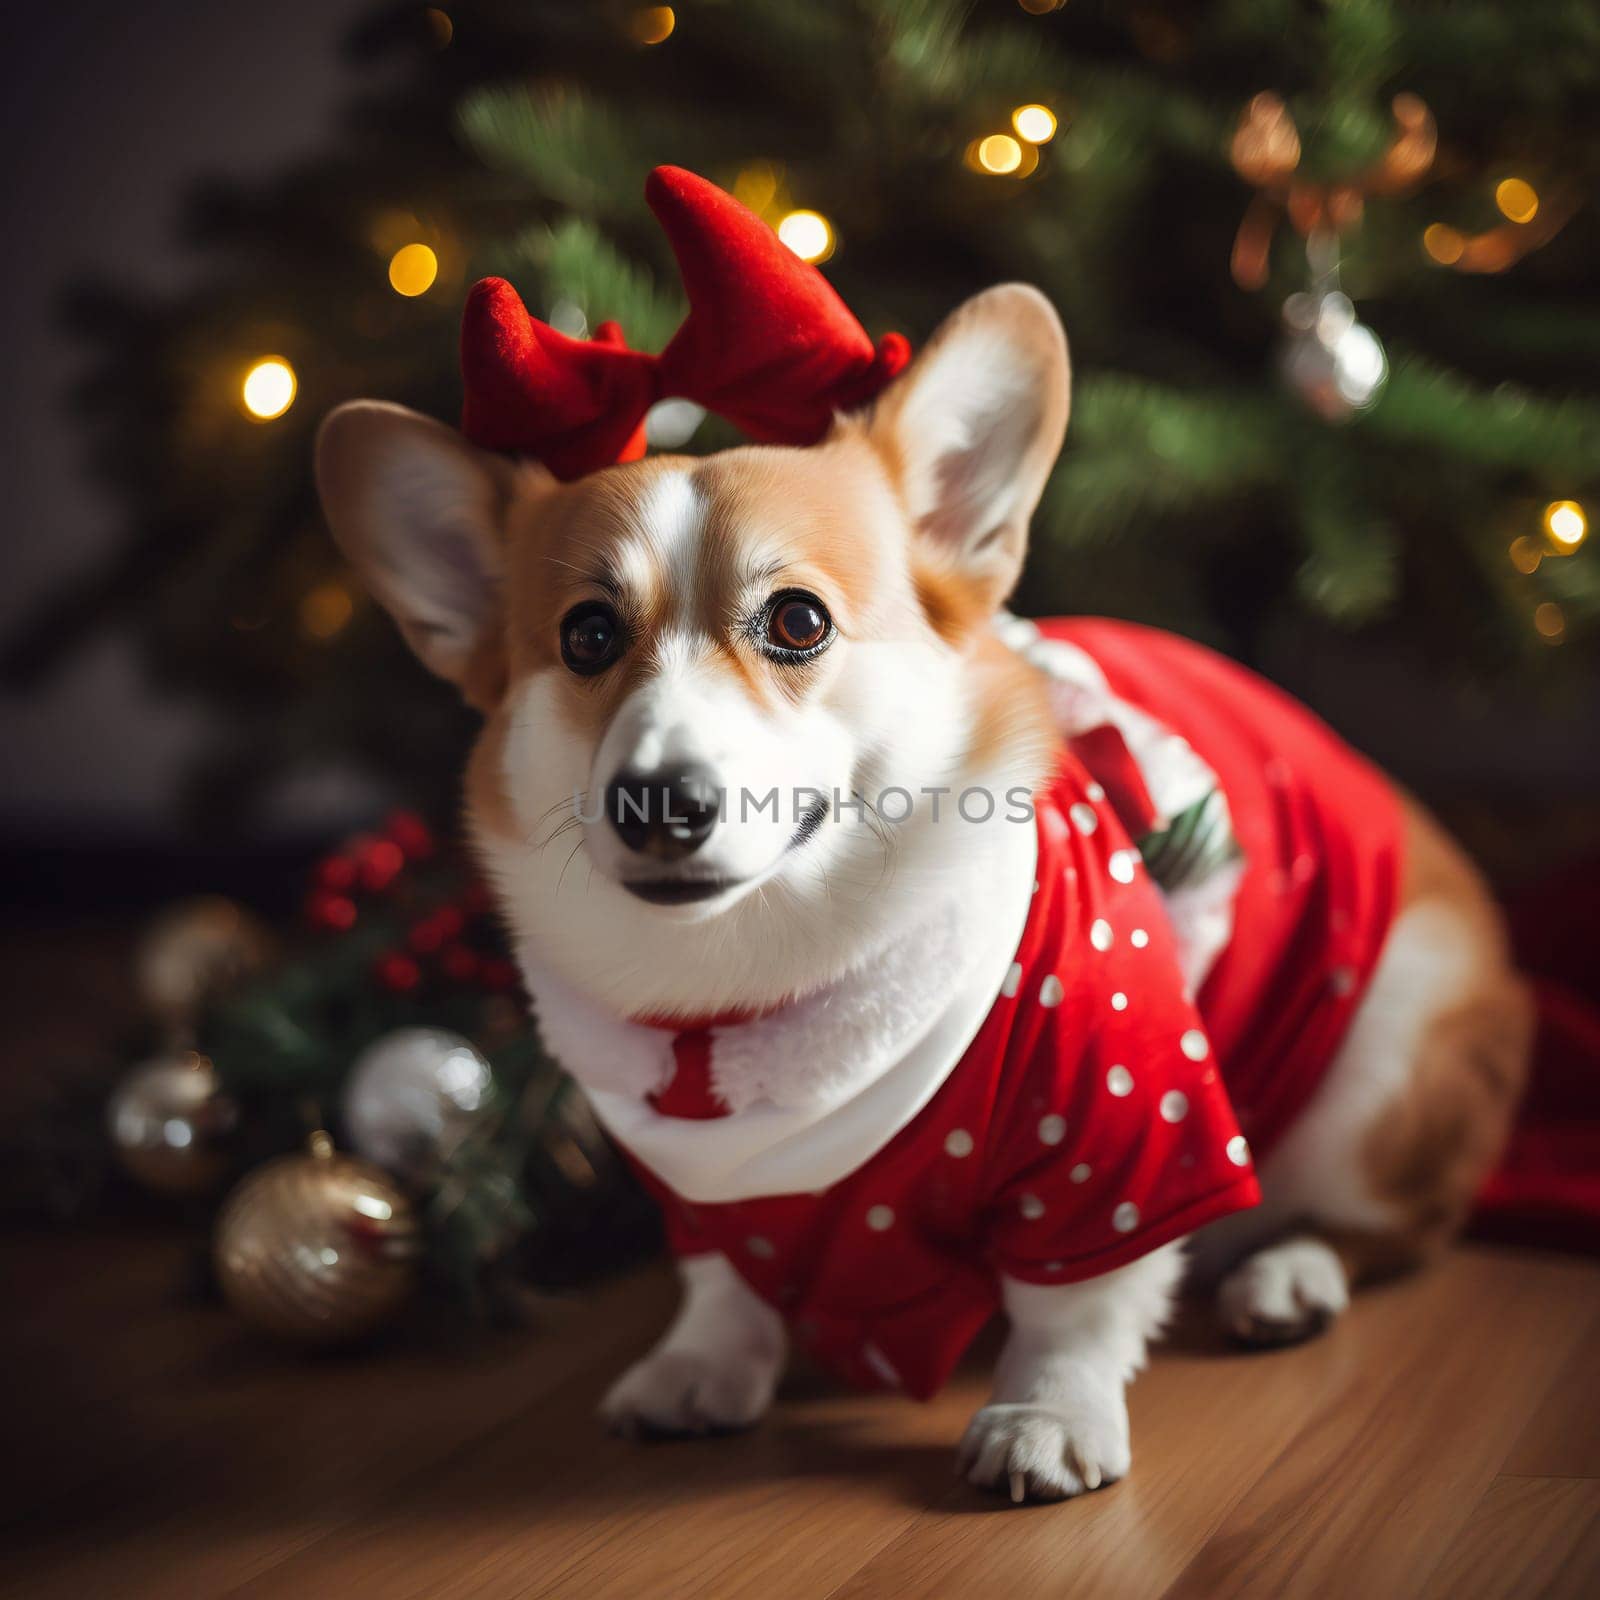 Welsh corgi pembroke sitting on the floor in Christmas costume and decorations in the background.